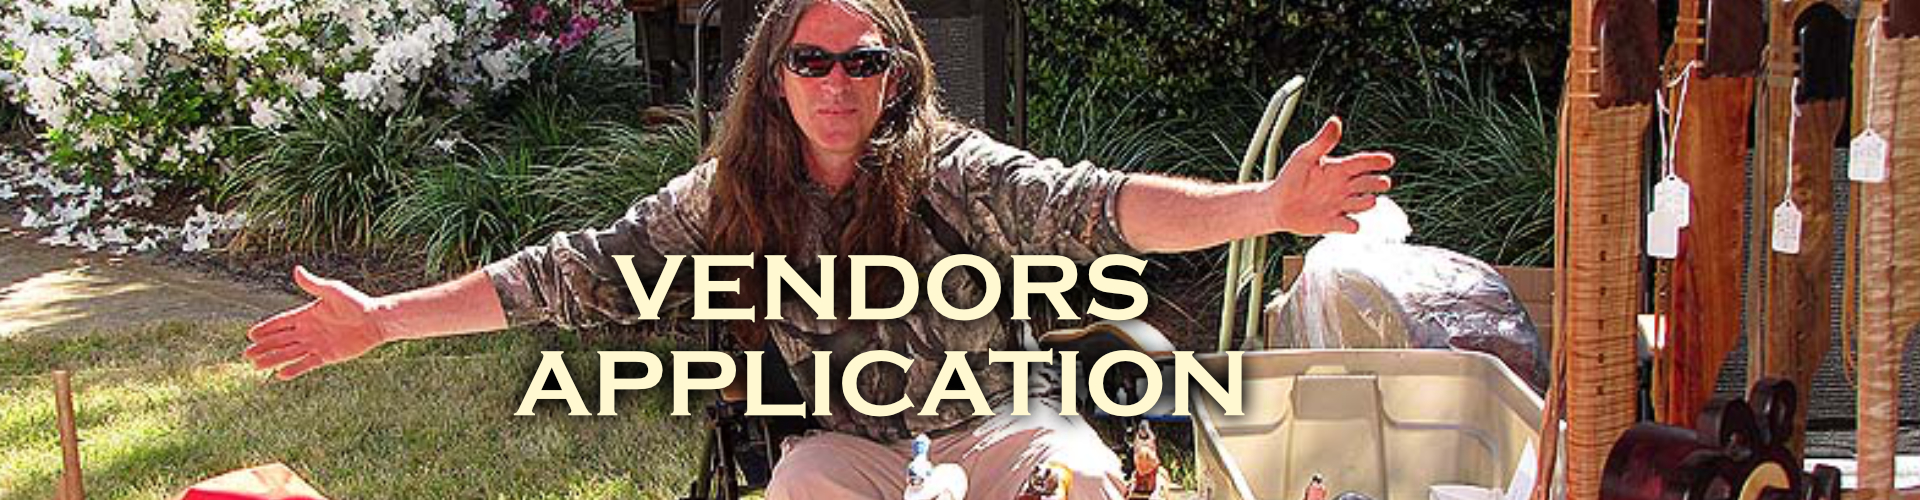 Musical Echoes Vendor Rules